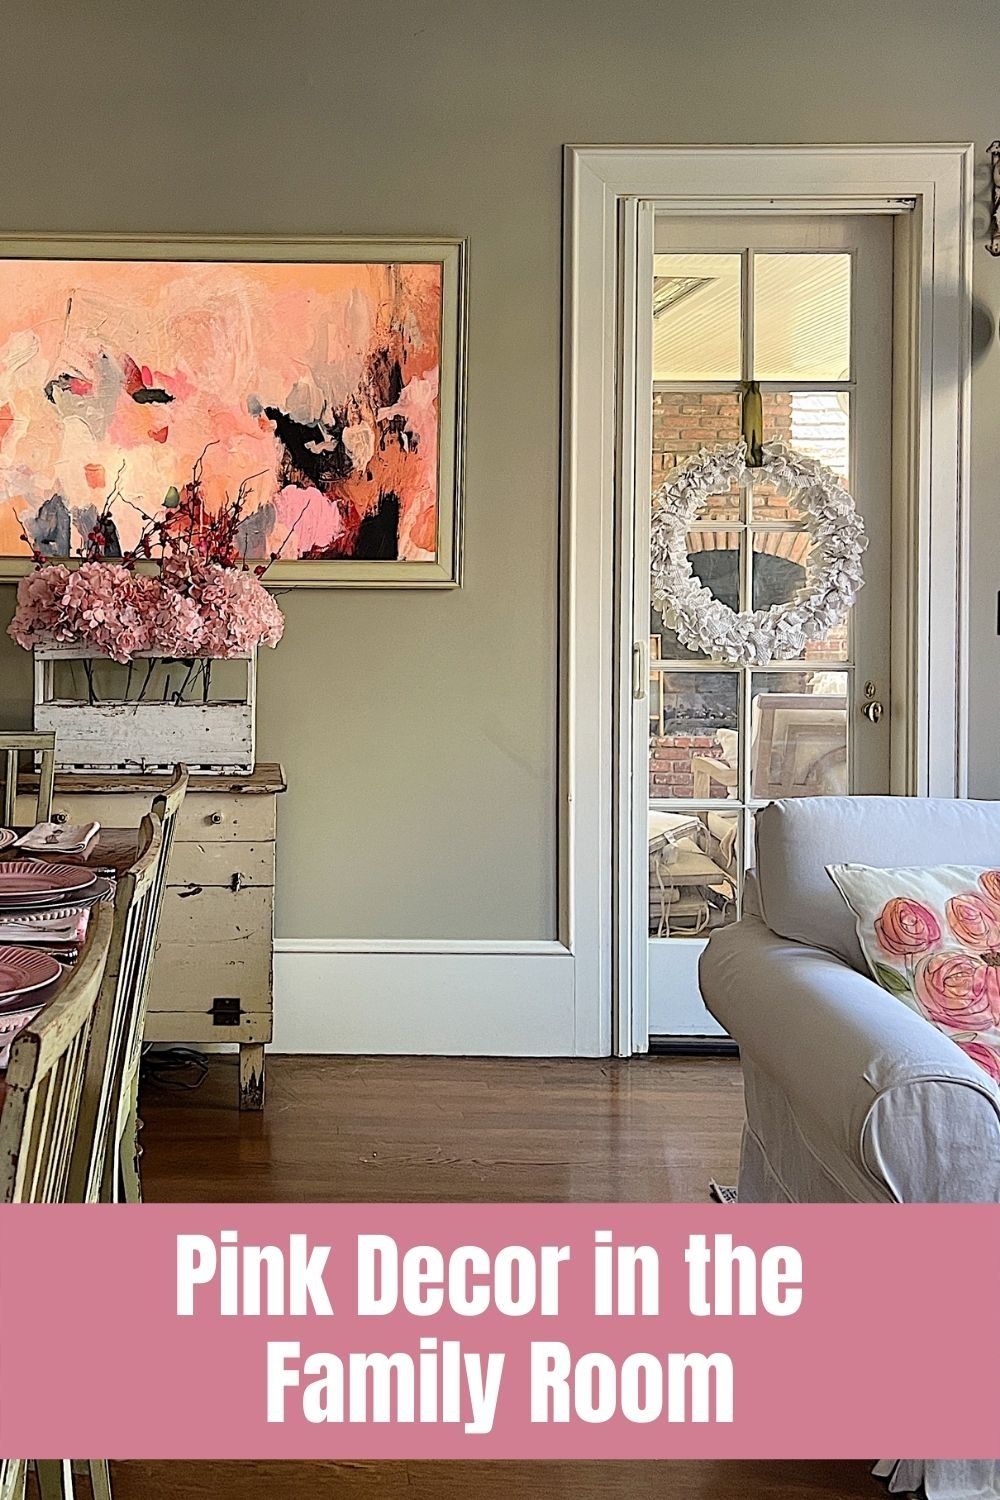 I love to add Valentine's day decor to our home. Today I am sharing how to use pink decor in the family room. In a cozy and comfortable way.